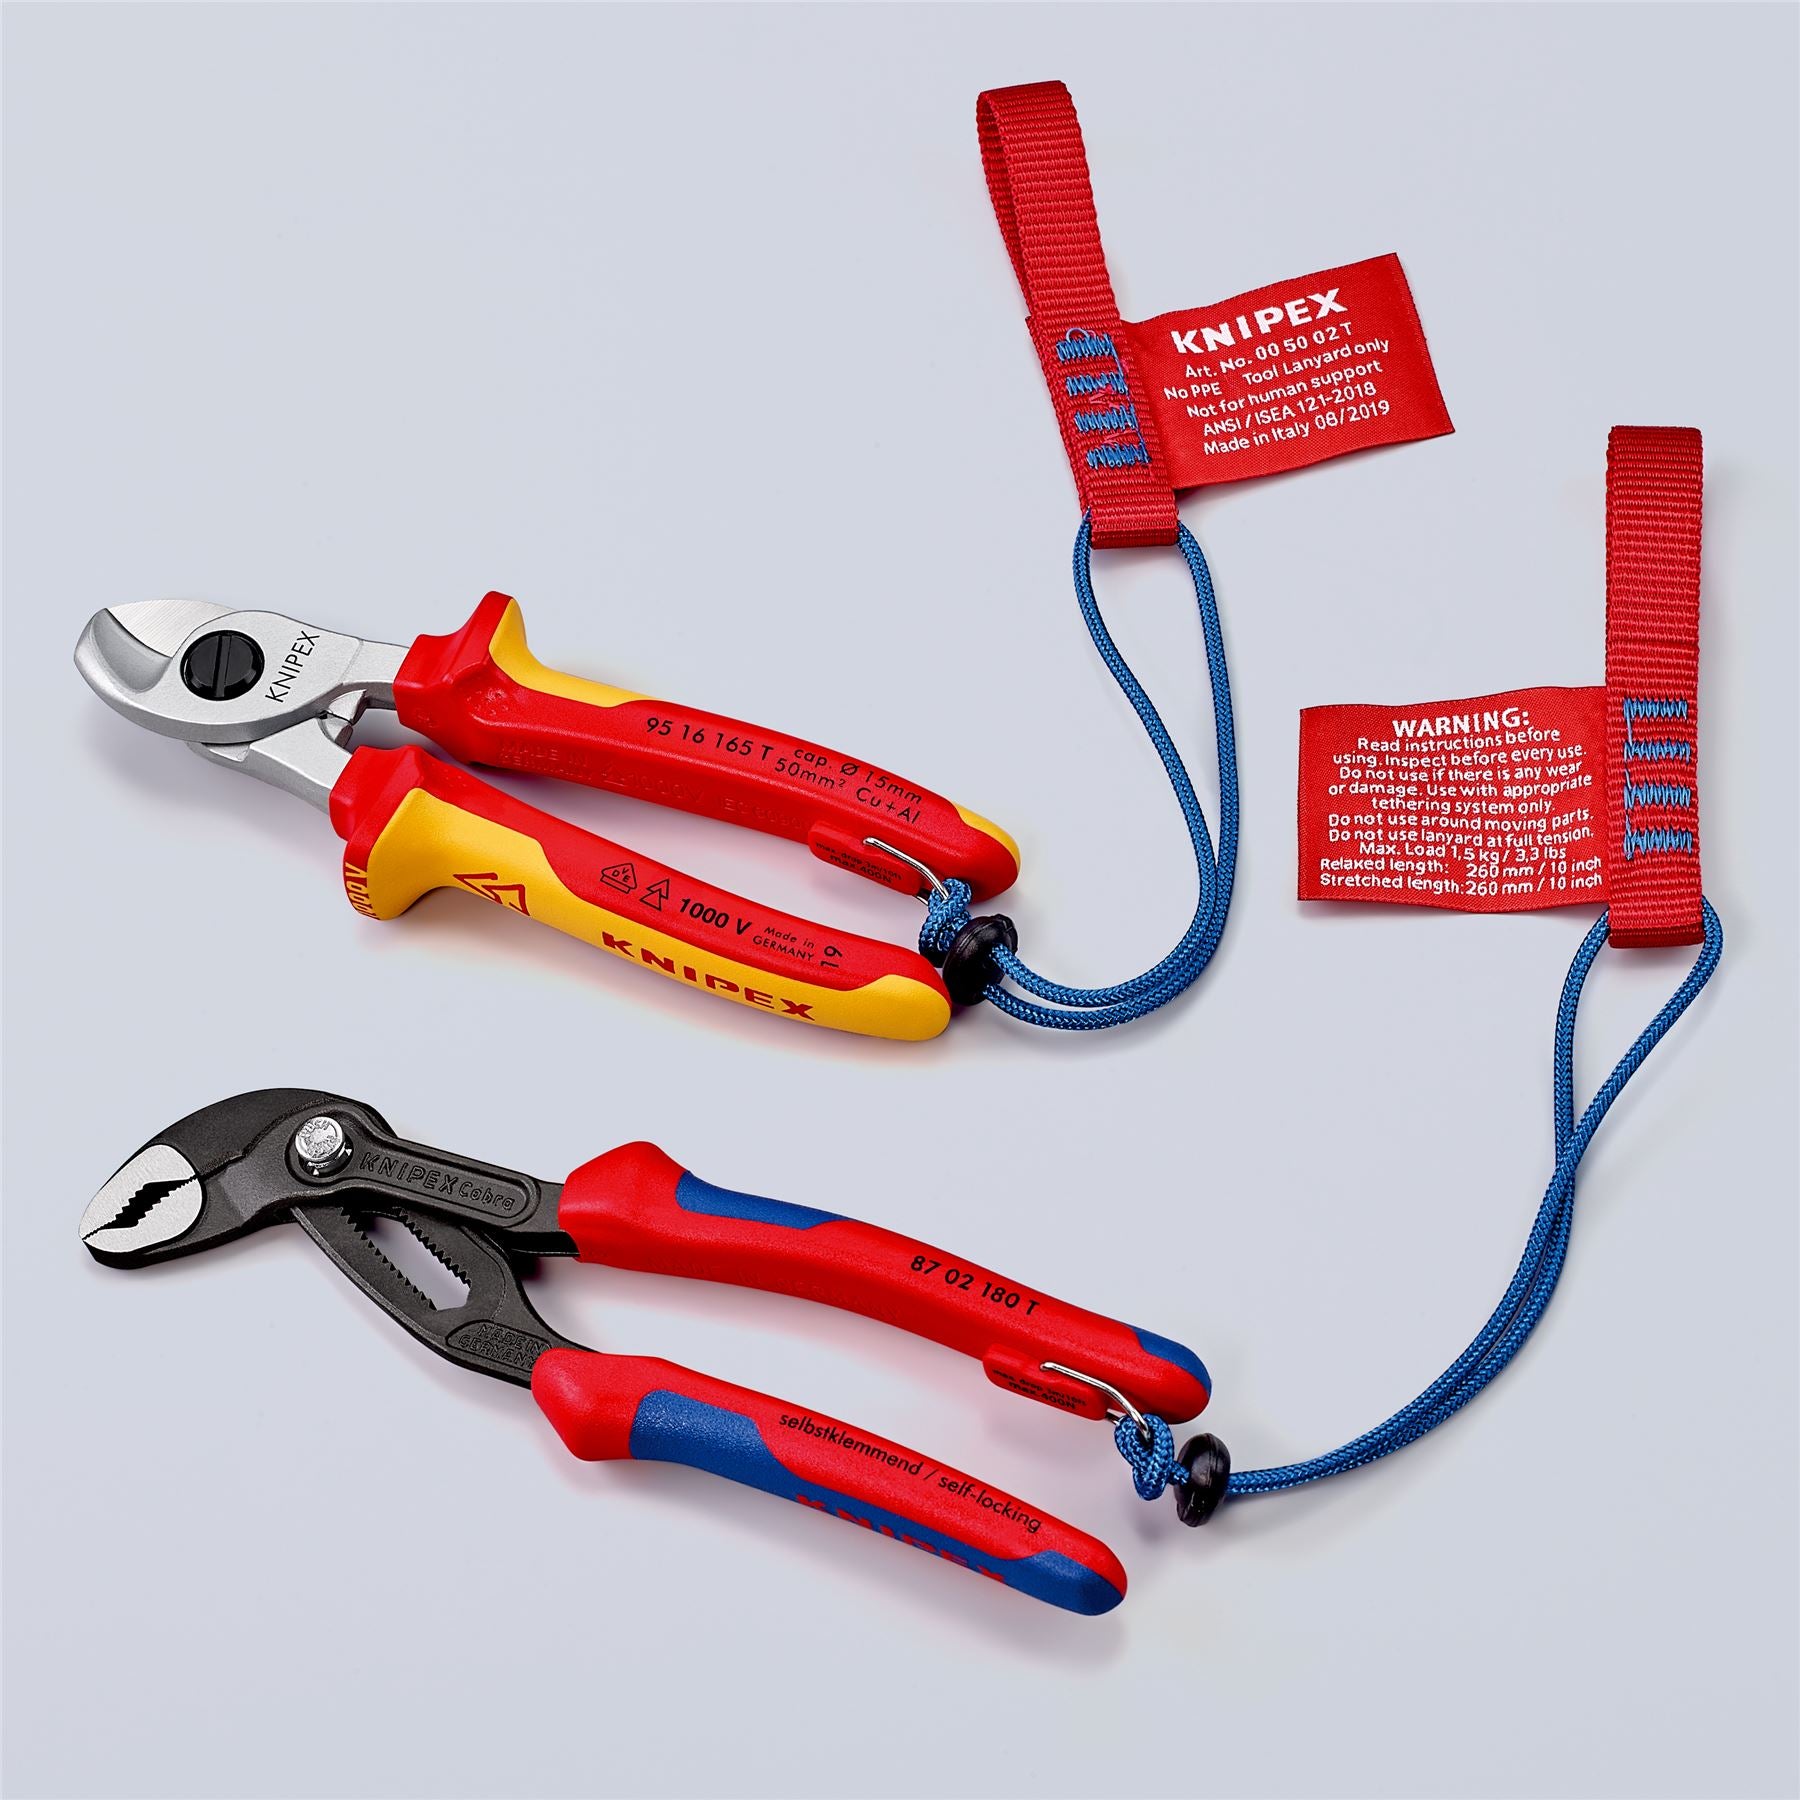 Knipex Tool Tether Adapter Strap 3 Pack Working at Height 1.5kg Max Load 00 50 02 T BK